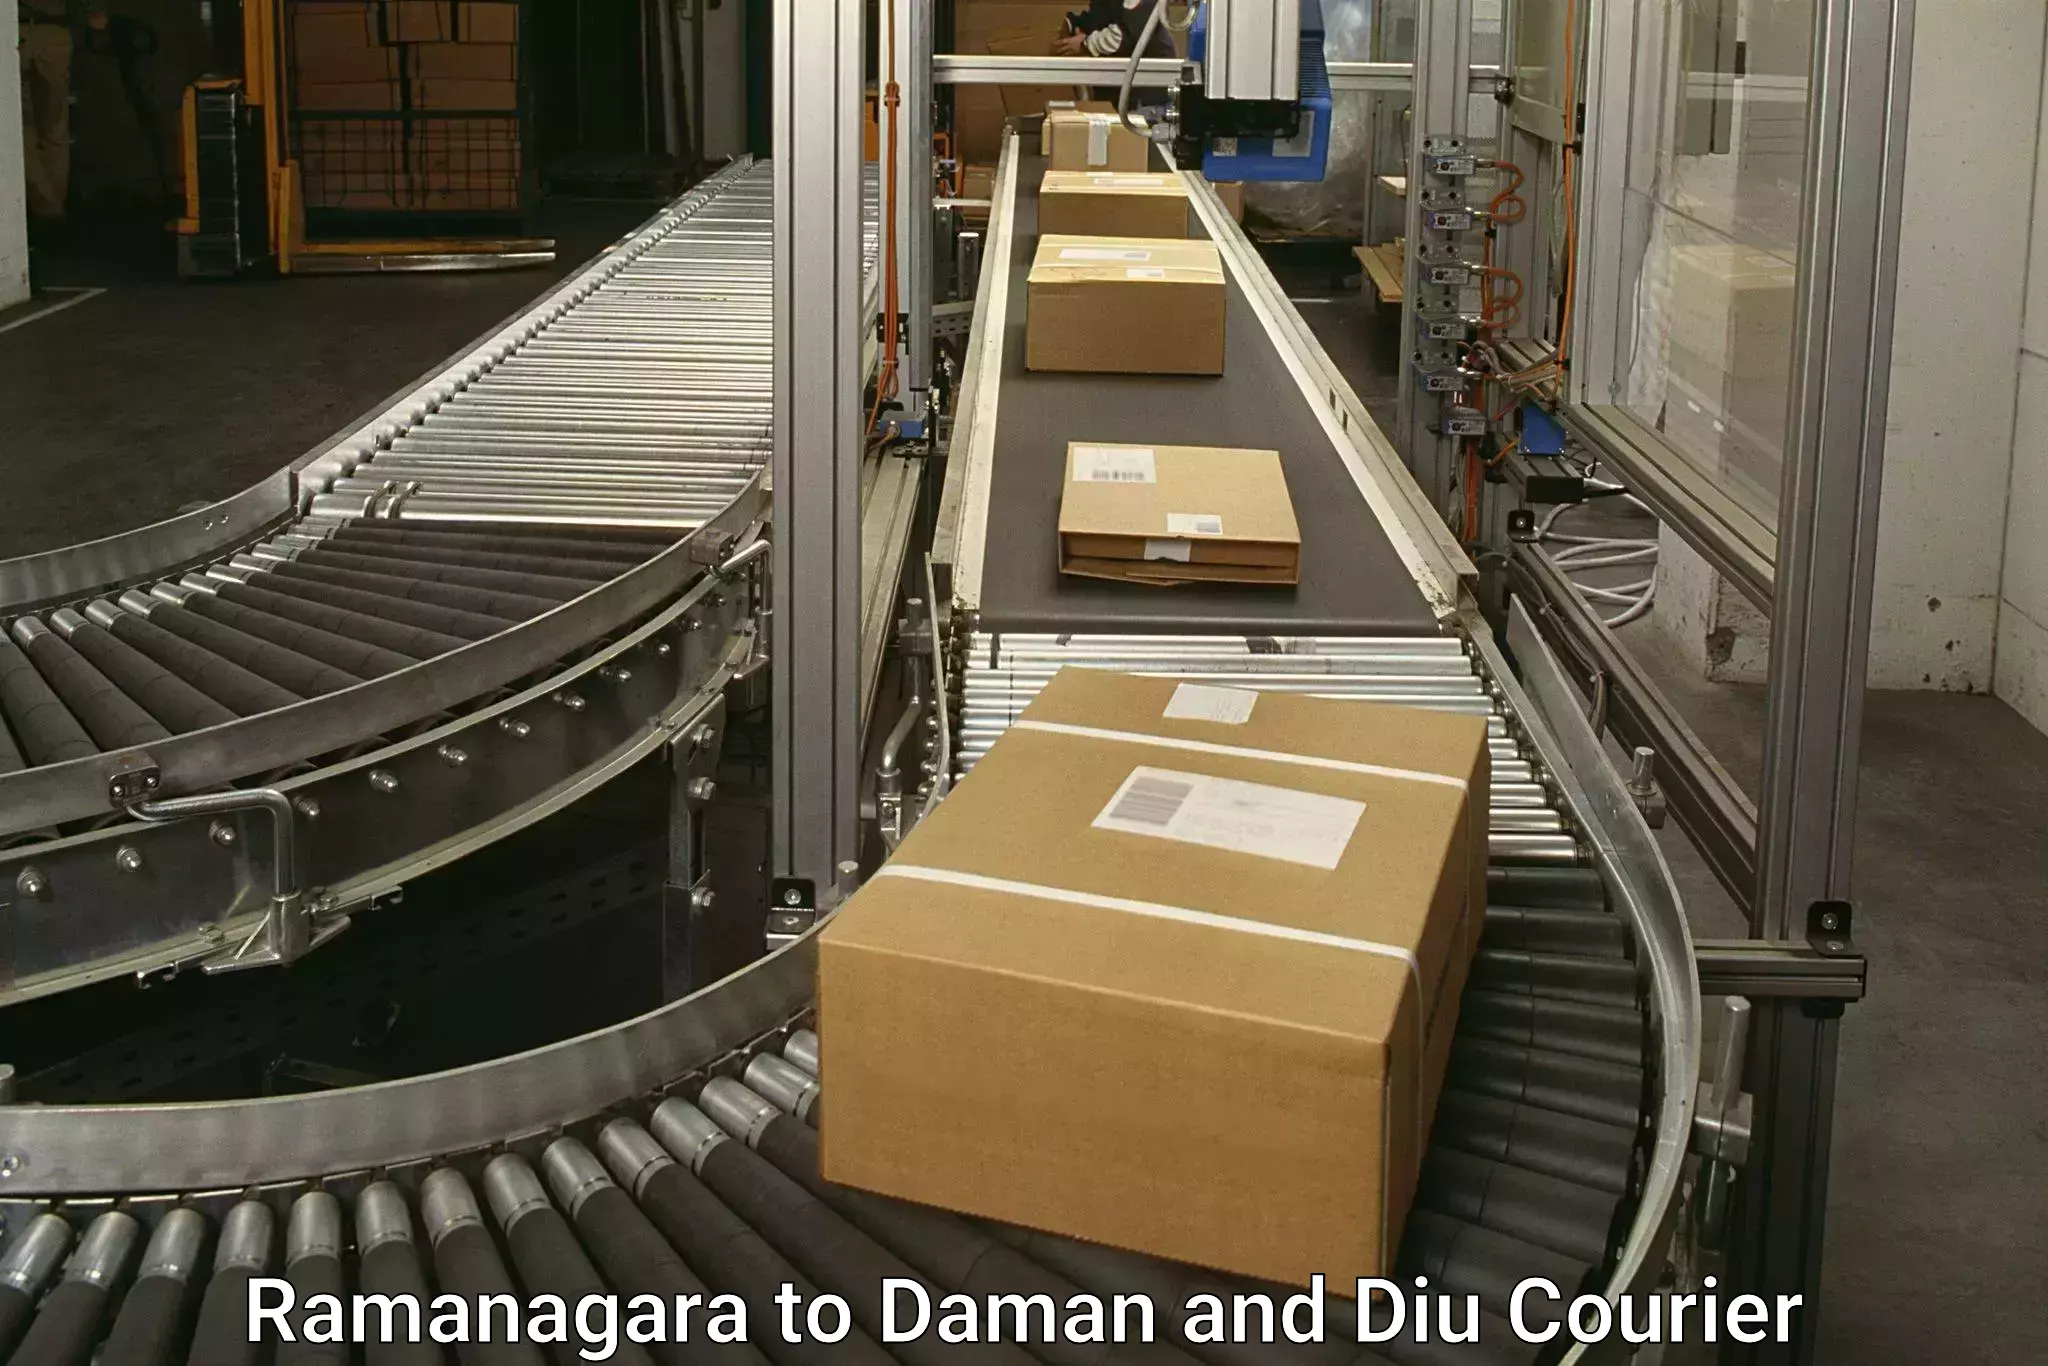 End-to-end delivery Ramanagara to Diu